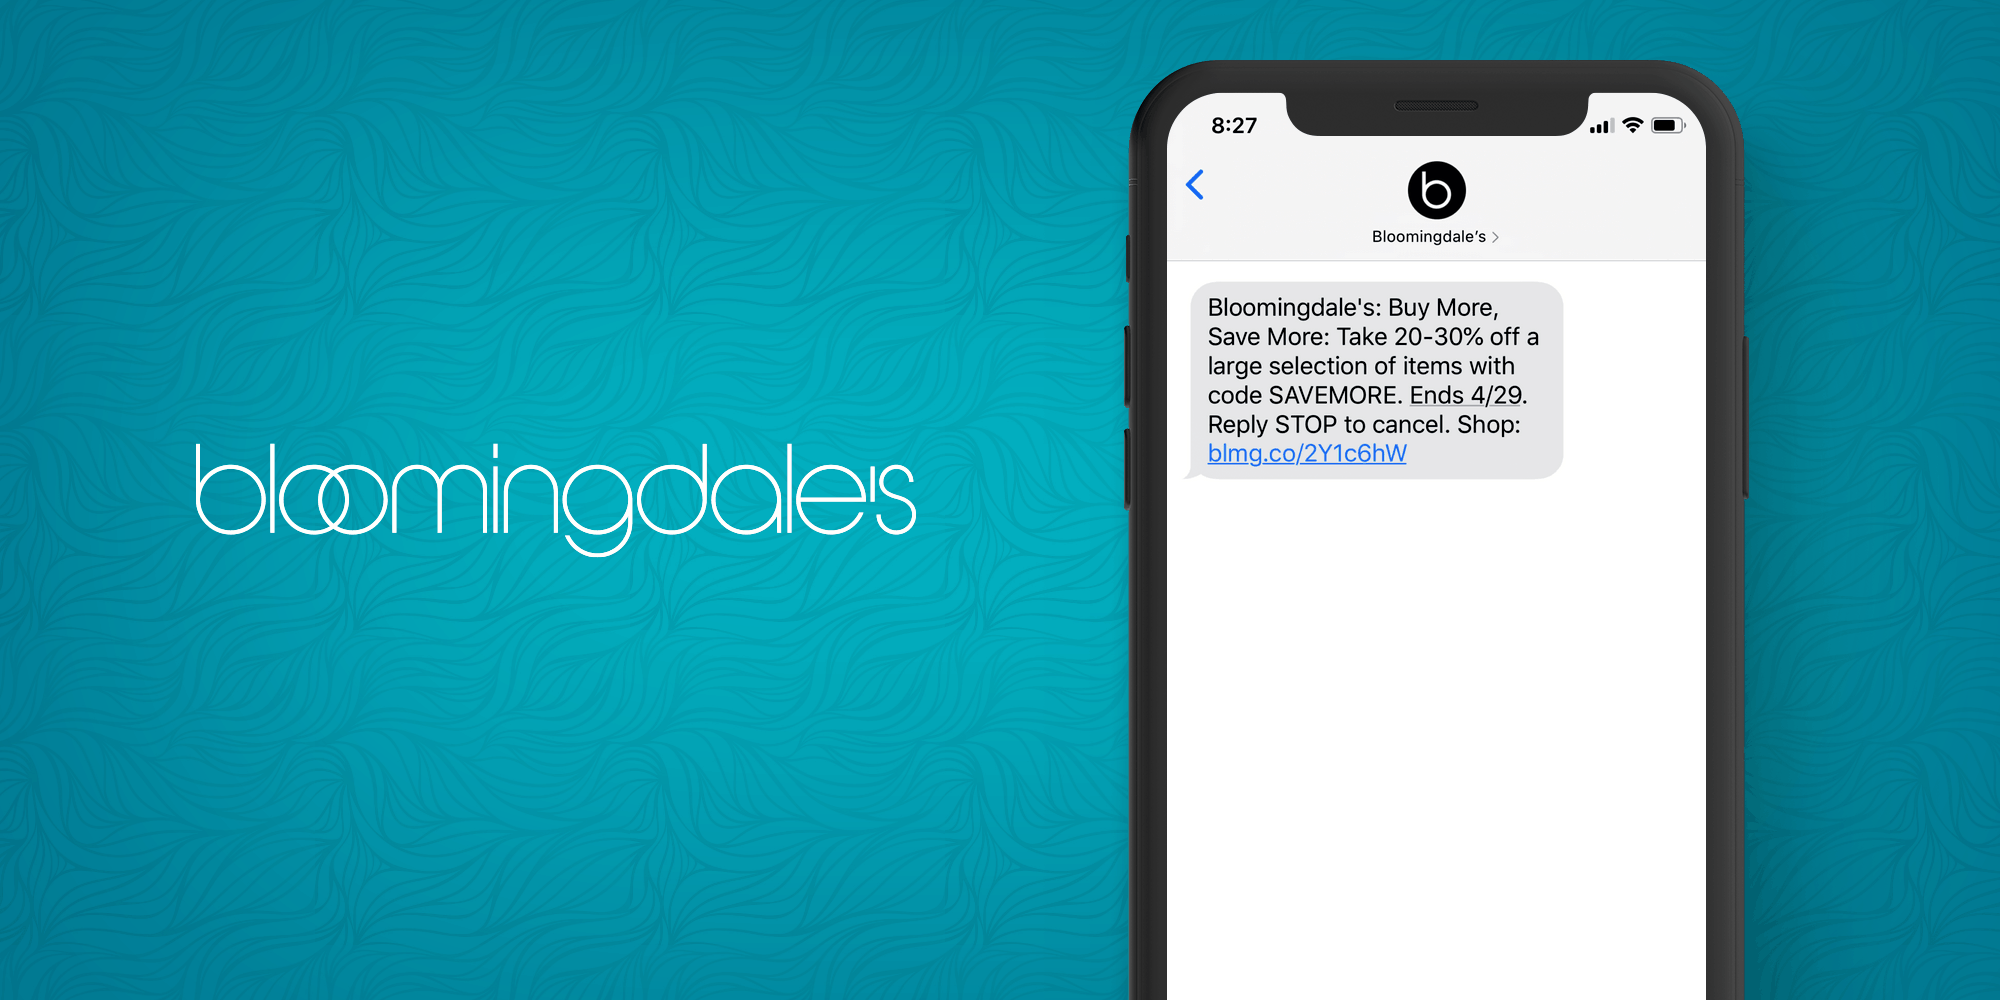 Bloomingdale’s SMS Marketing Example - 50 Examples of Brands Using SMS Marketing